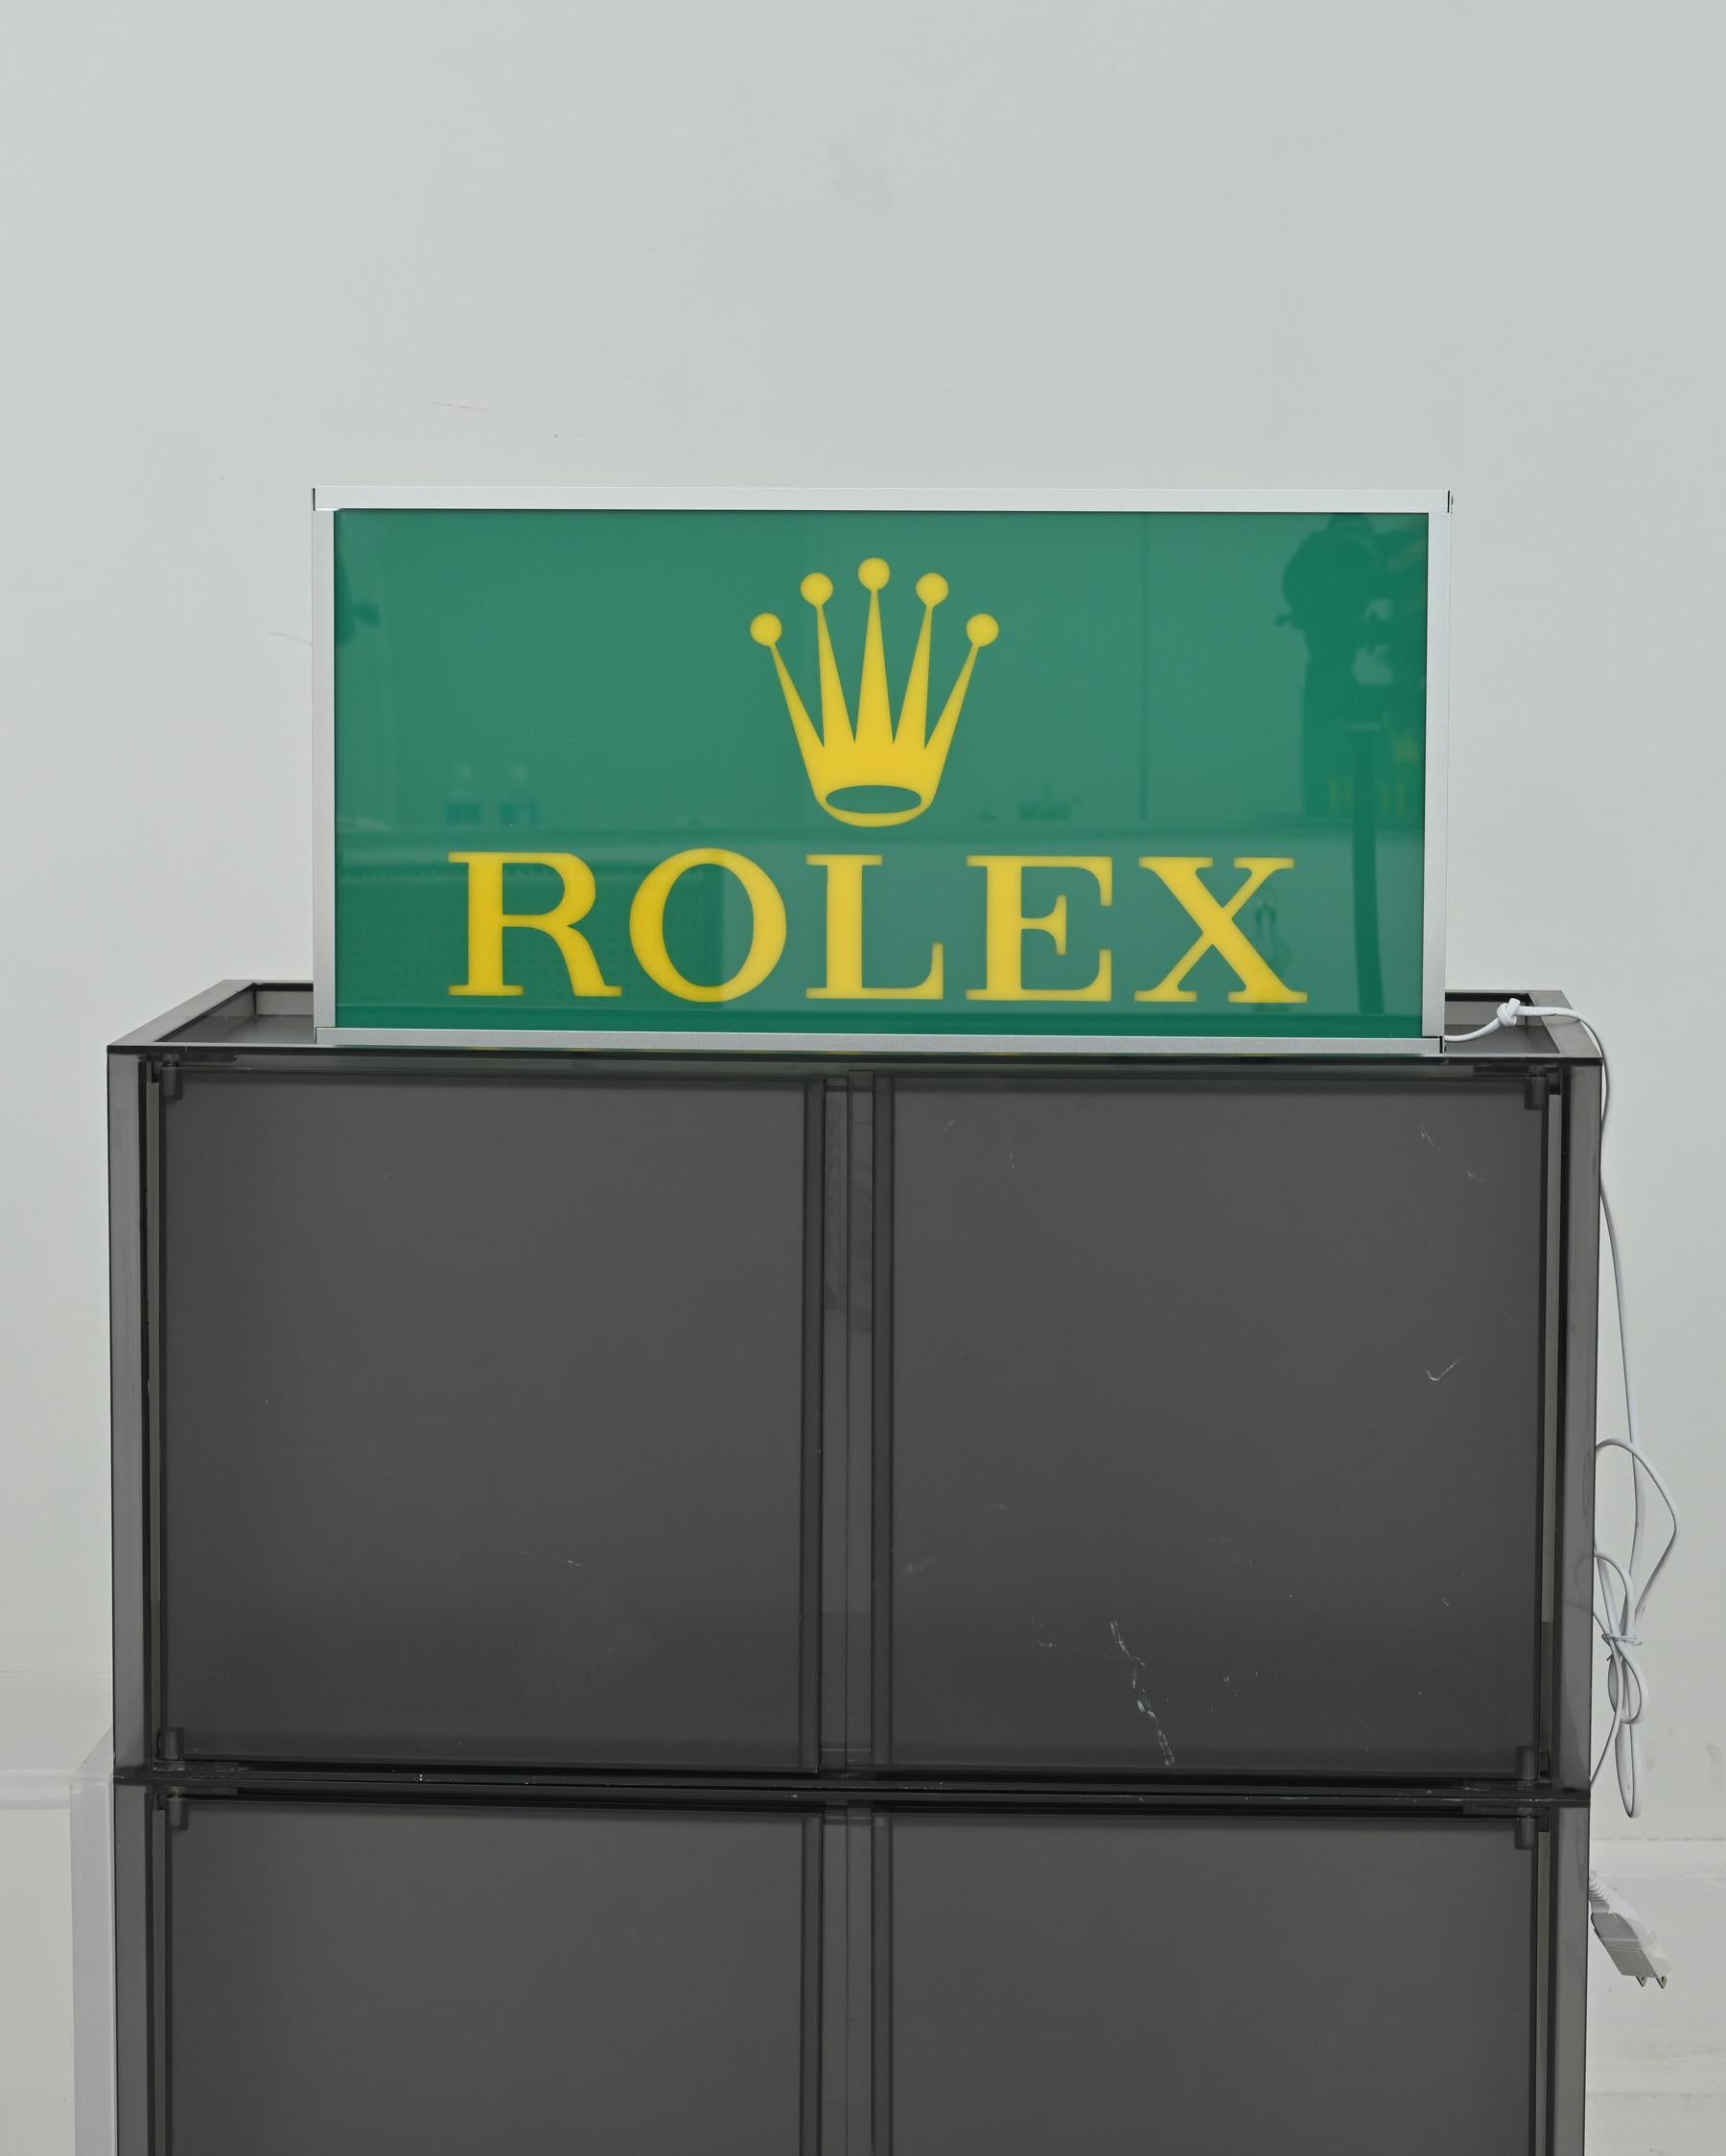 1990s ROLEX light board made of steel and plexiglass, with the Rolex logo and a protective plate. The sign has very minimal indications of use. The circuit board is made up of yellow LED lighting. Country of origin: Switzerland